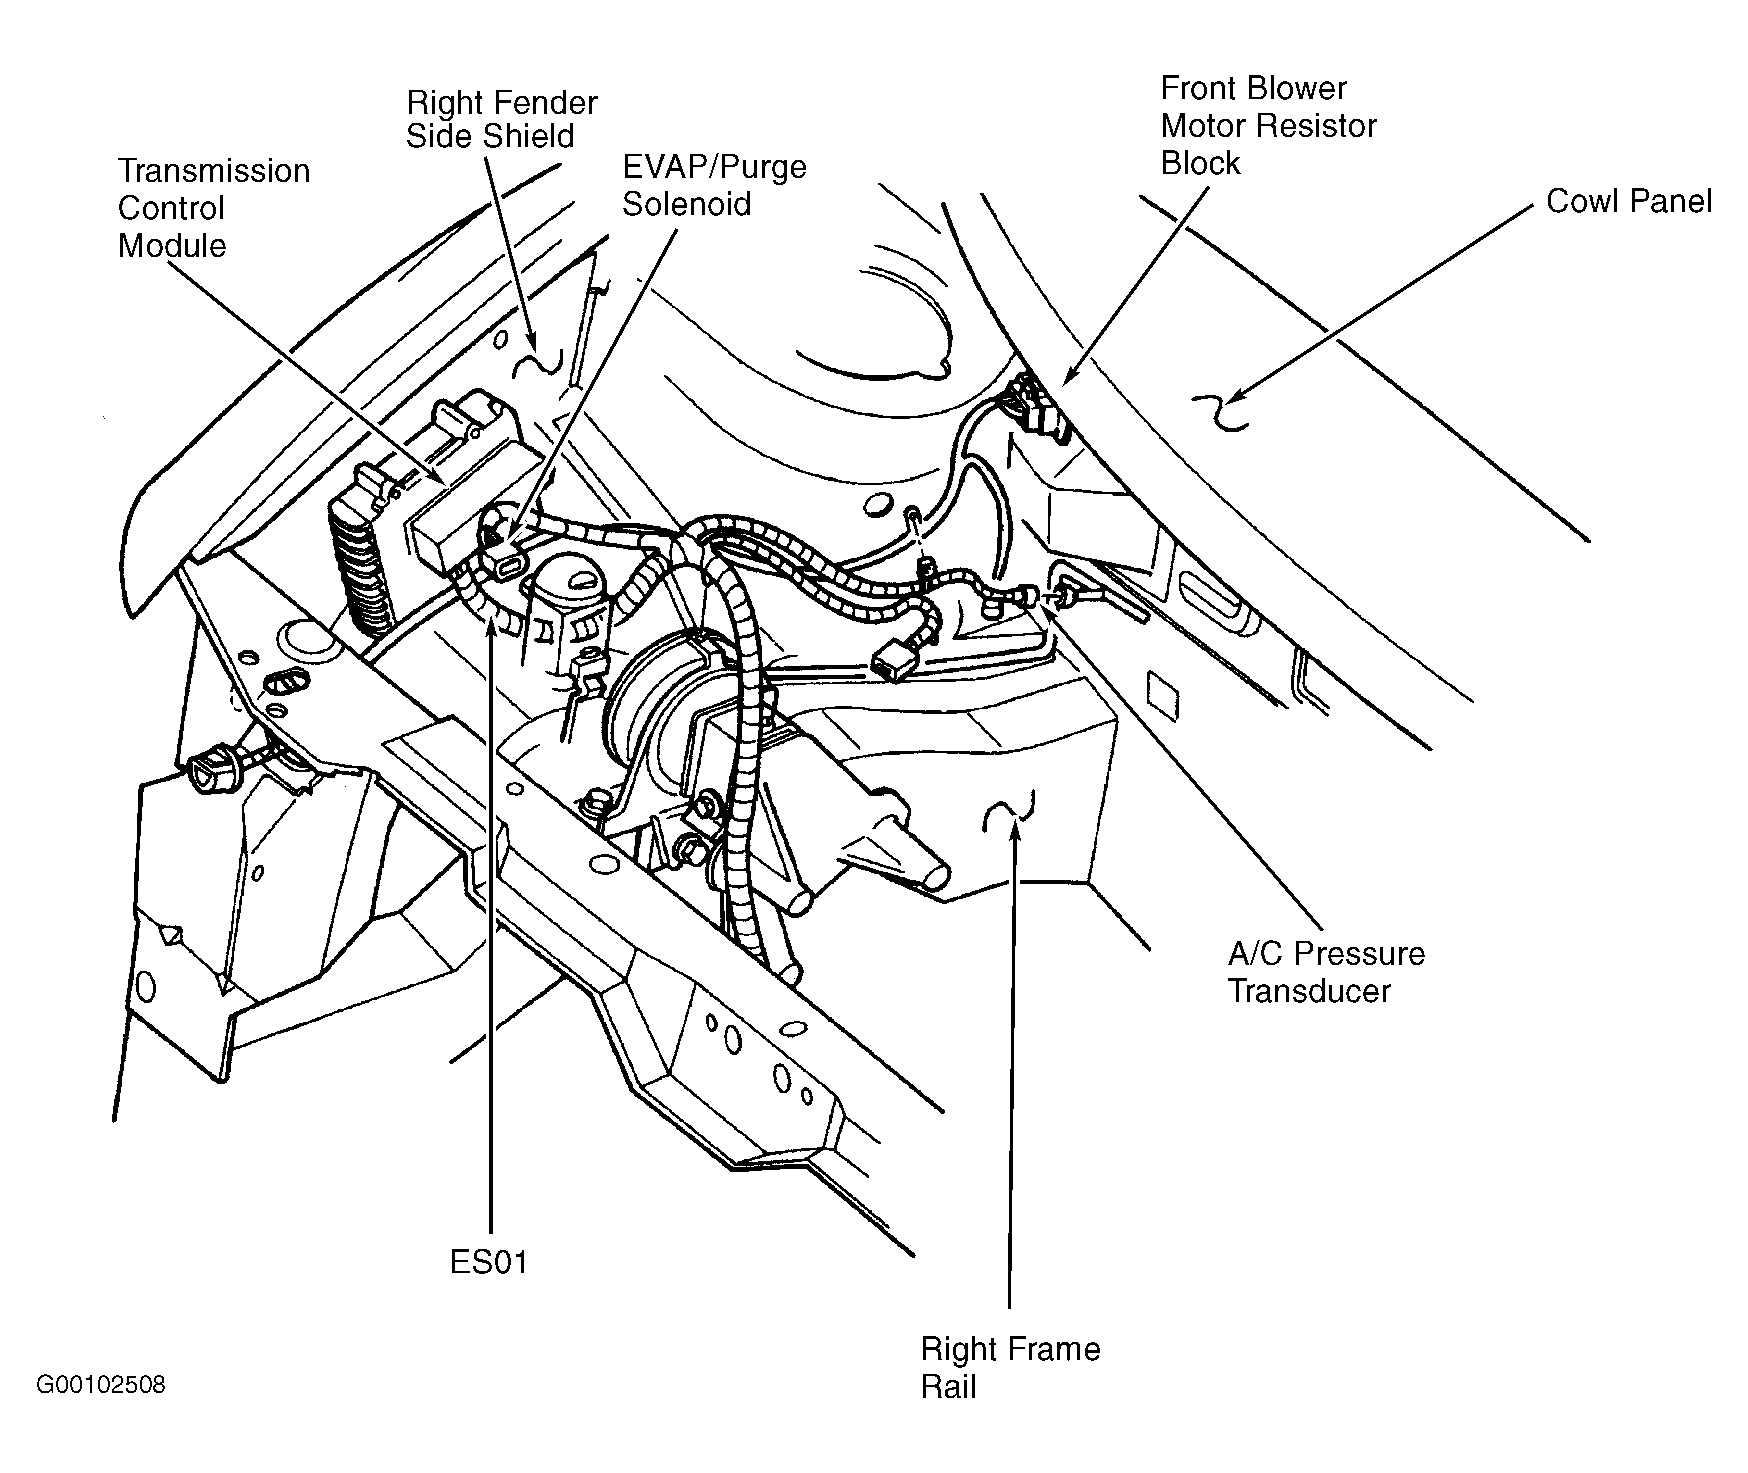 Chrysler Grand Voyager SE 2000 - Component Locations -  Right Side Of Engine Compartment